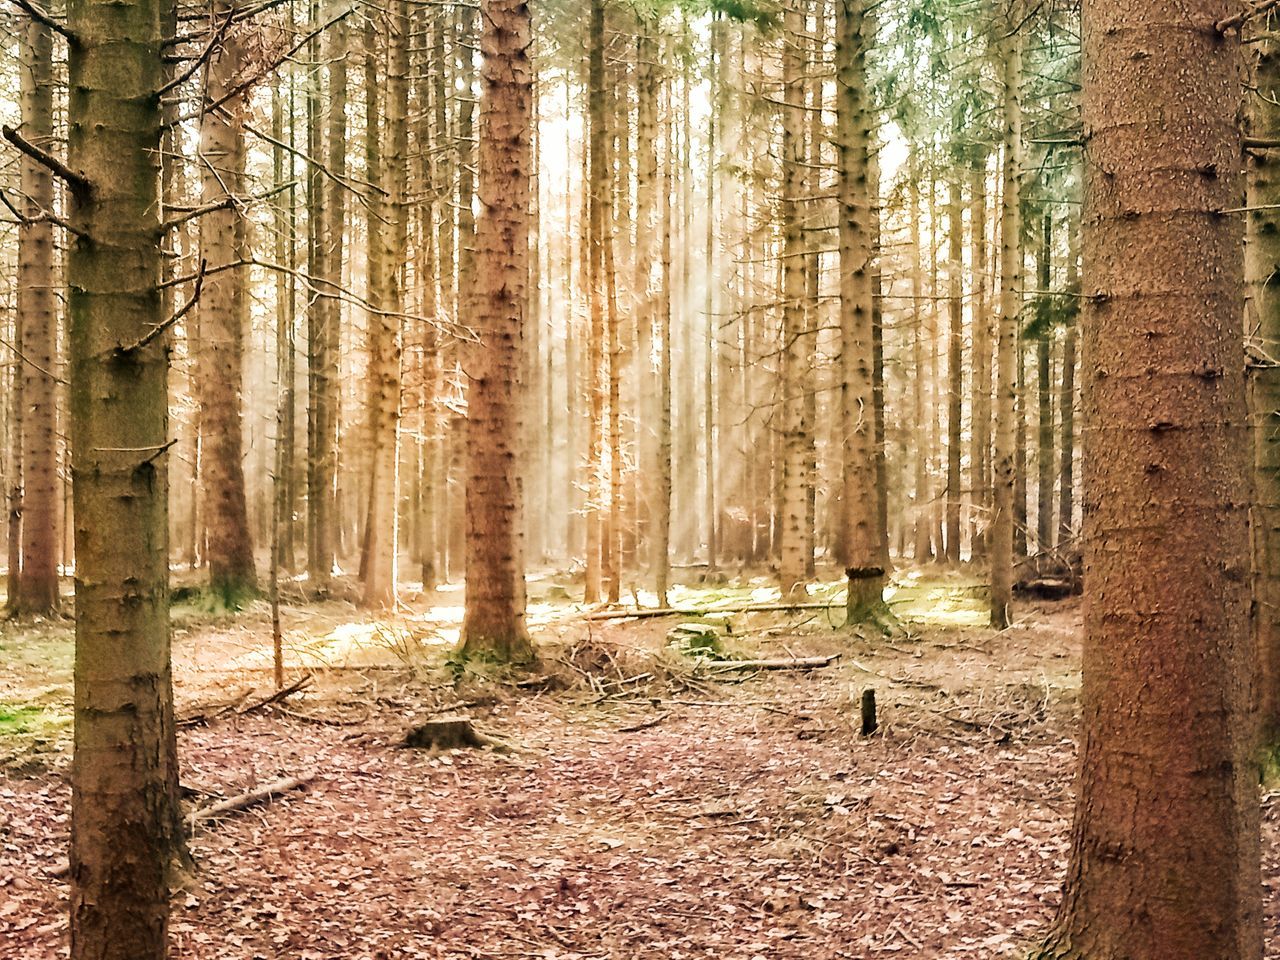 tree, forest, land, tree trunk, trunk, plant, woodland, nature, natural environment, tranquility, beauty in nature, grove, tranquil scene, non-urban scene, sunlight, growth, scenics - nature, environment, no people, landscape, day, leaf, autumn, outdoors, wood, idyllic, wilderness, remote, pine woodland, plant part